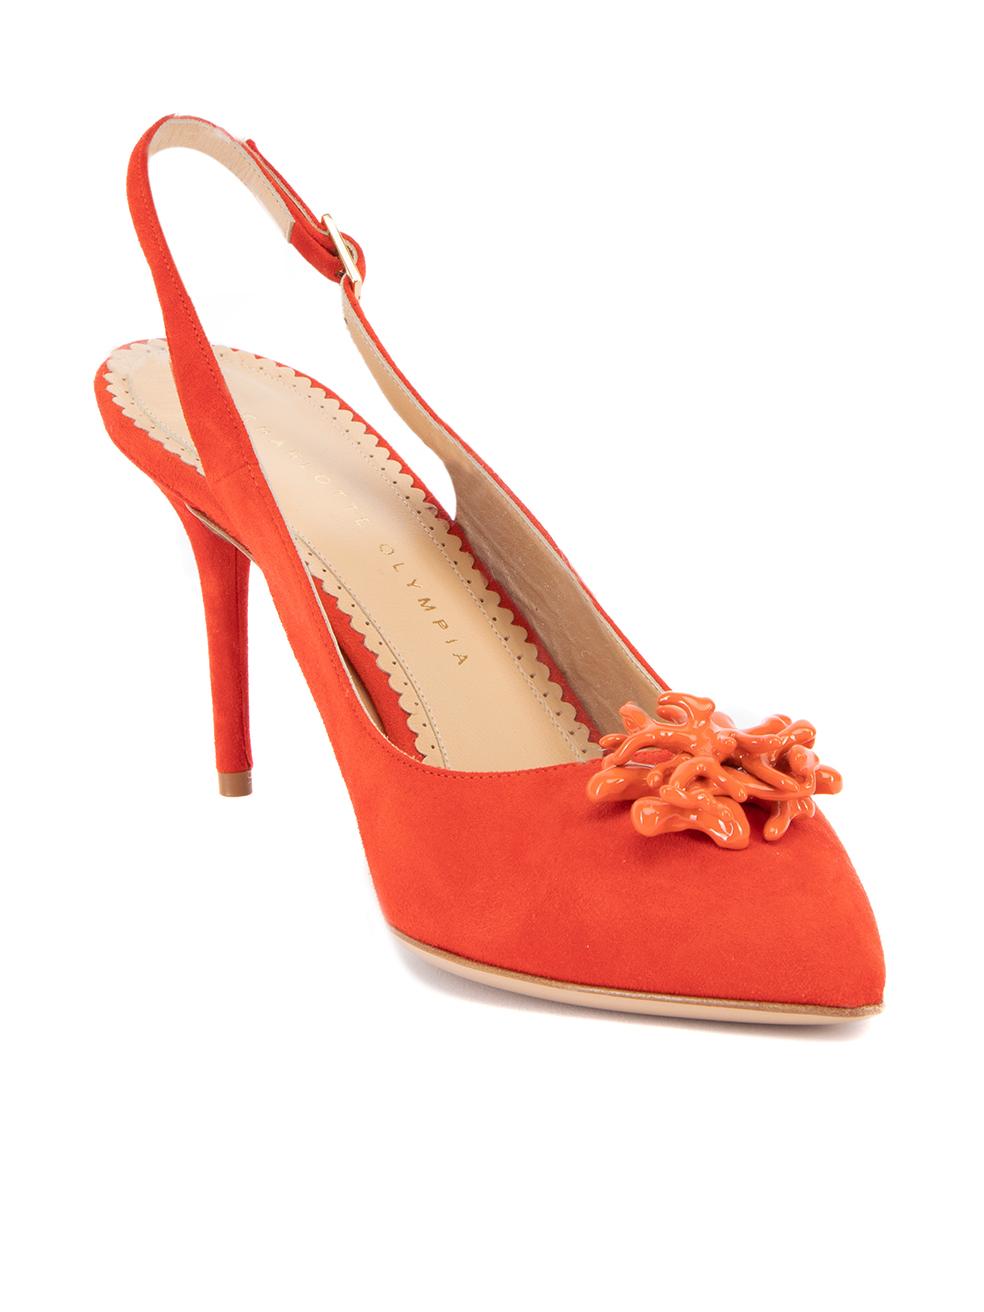 CONDITION is Very good. Hardly any visible wear to heels is evident on this used Charlotte Olympia designer resale item. Details Red Suede Slingback heels Pointed toe Coral embellishment on cap toe High heel Ankle strap closure Made in Italy